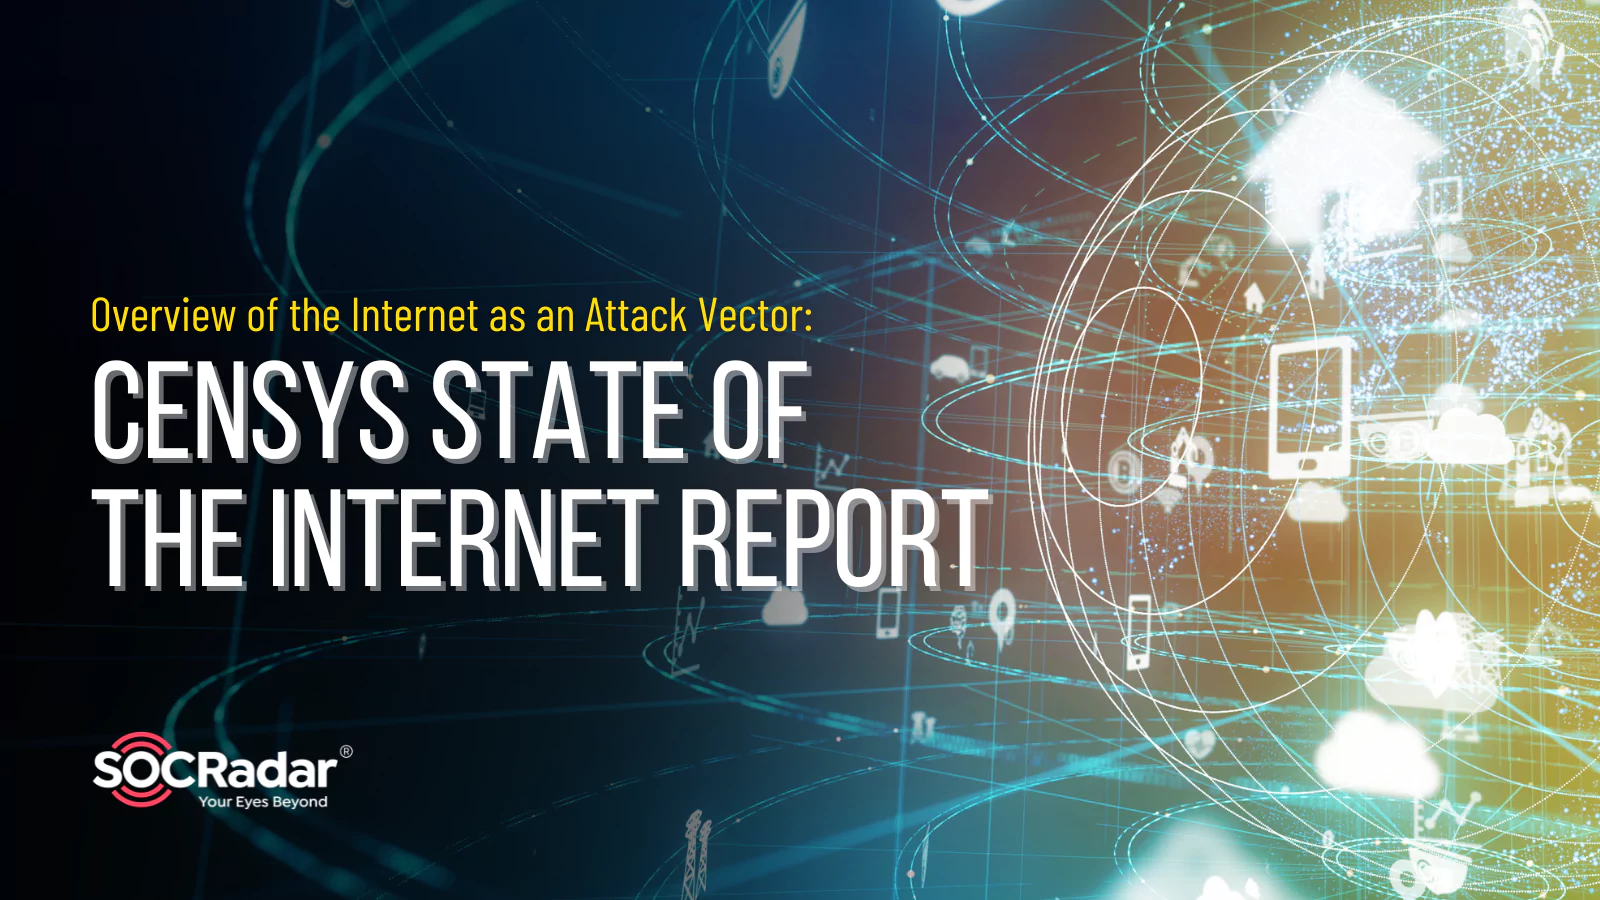 SOCRadar® Cyber Intelligence Inc. | Overview of the Internet as an Attack Vector: Censys State of The Internet Report